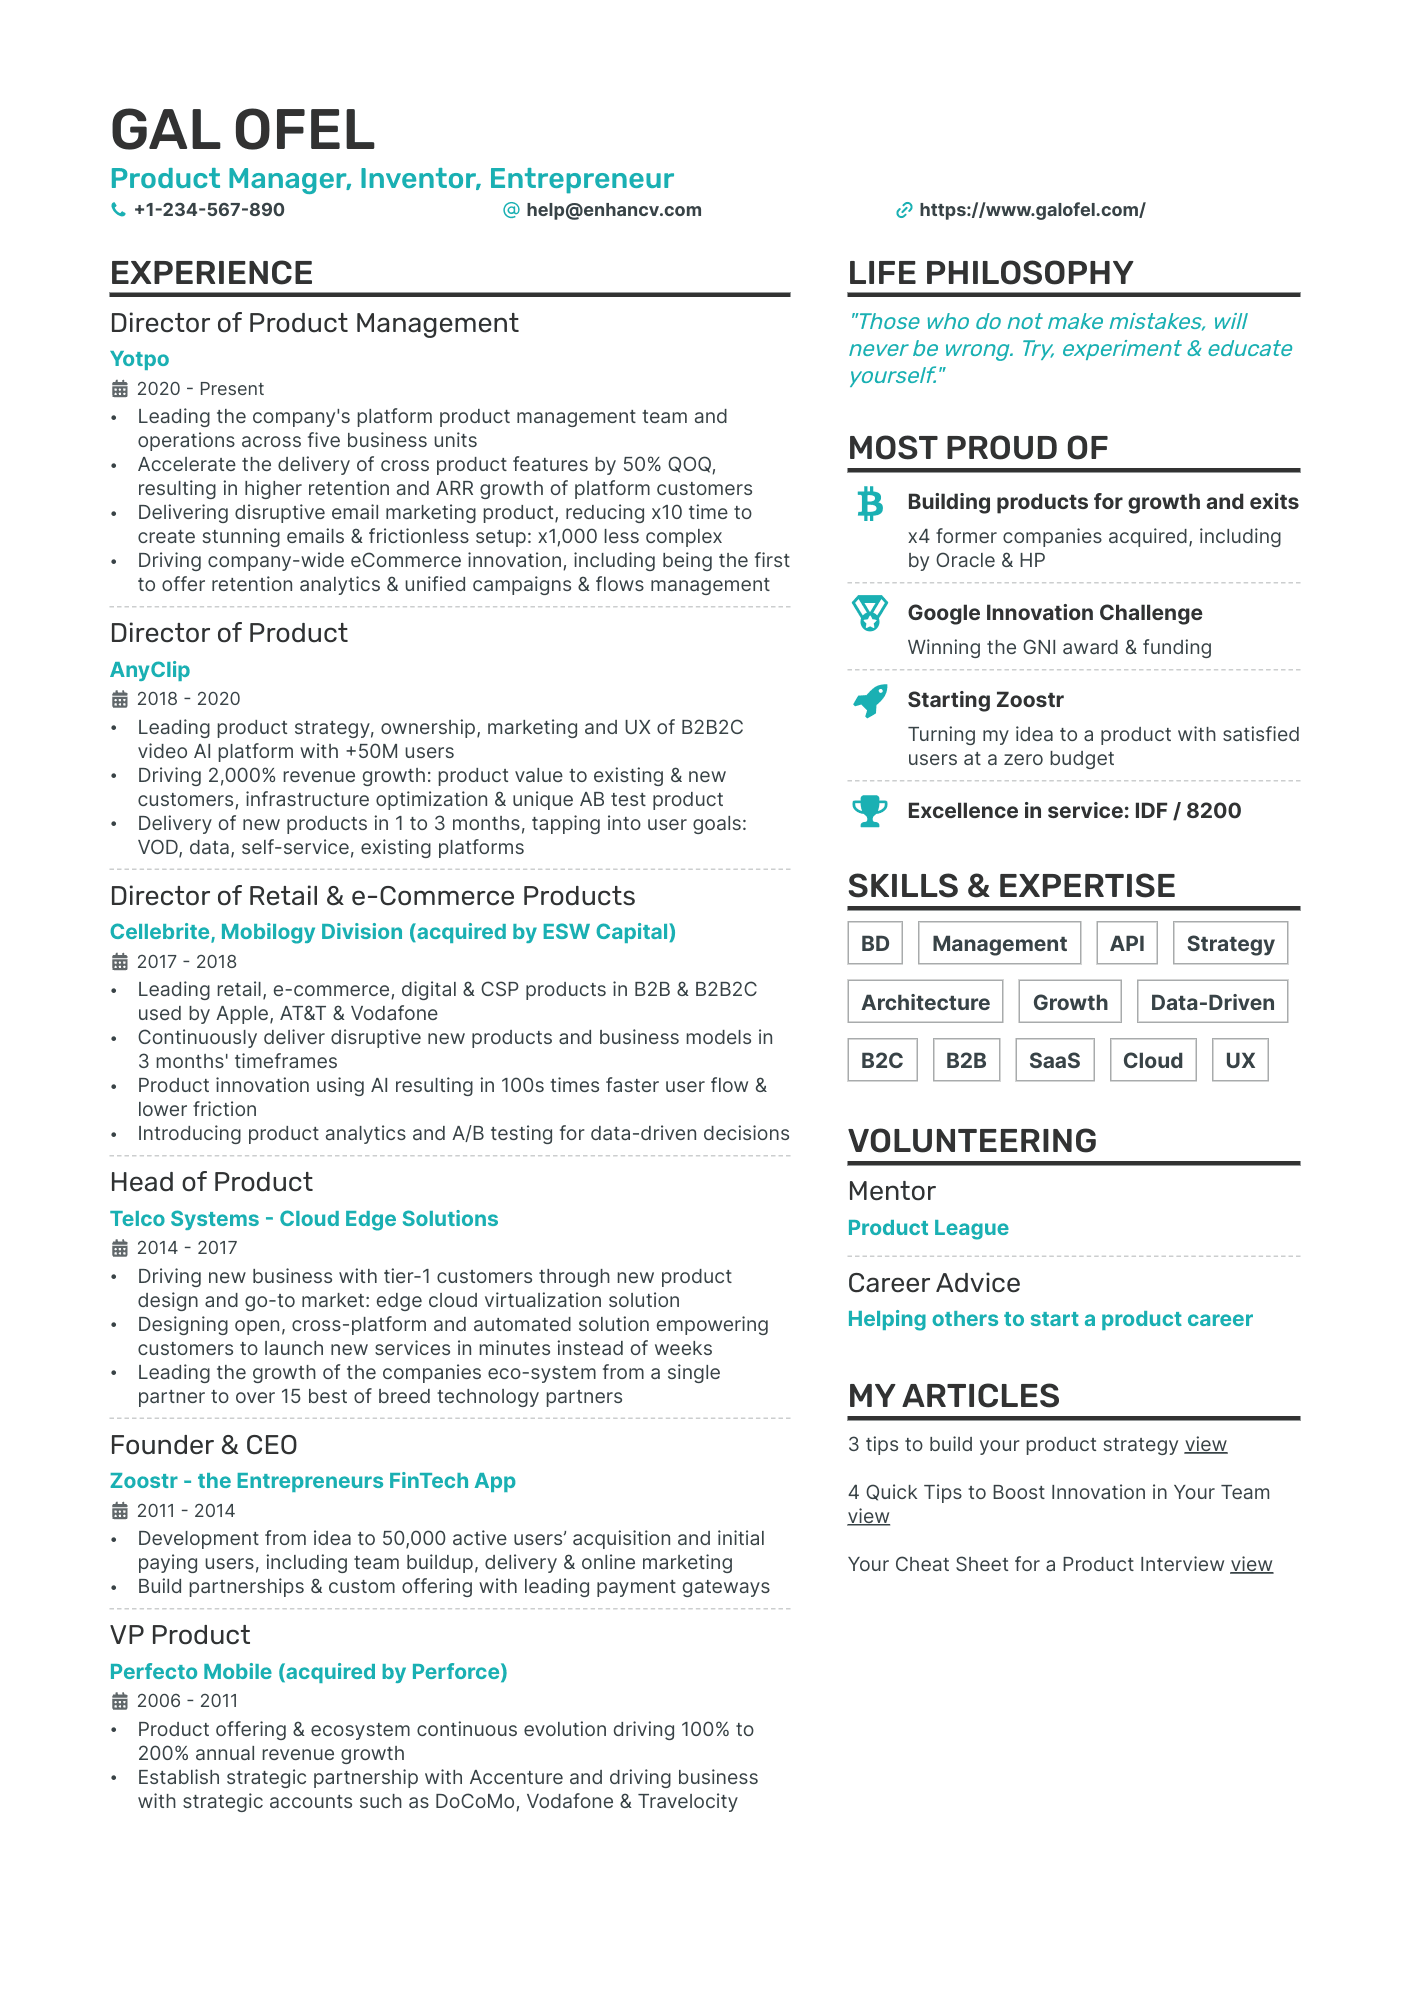 Product Manager, Inventor, Entrepreneur resume example